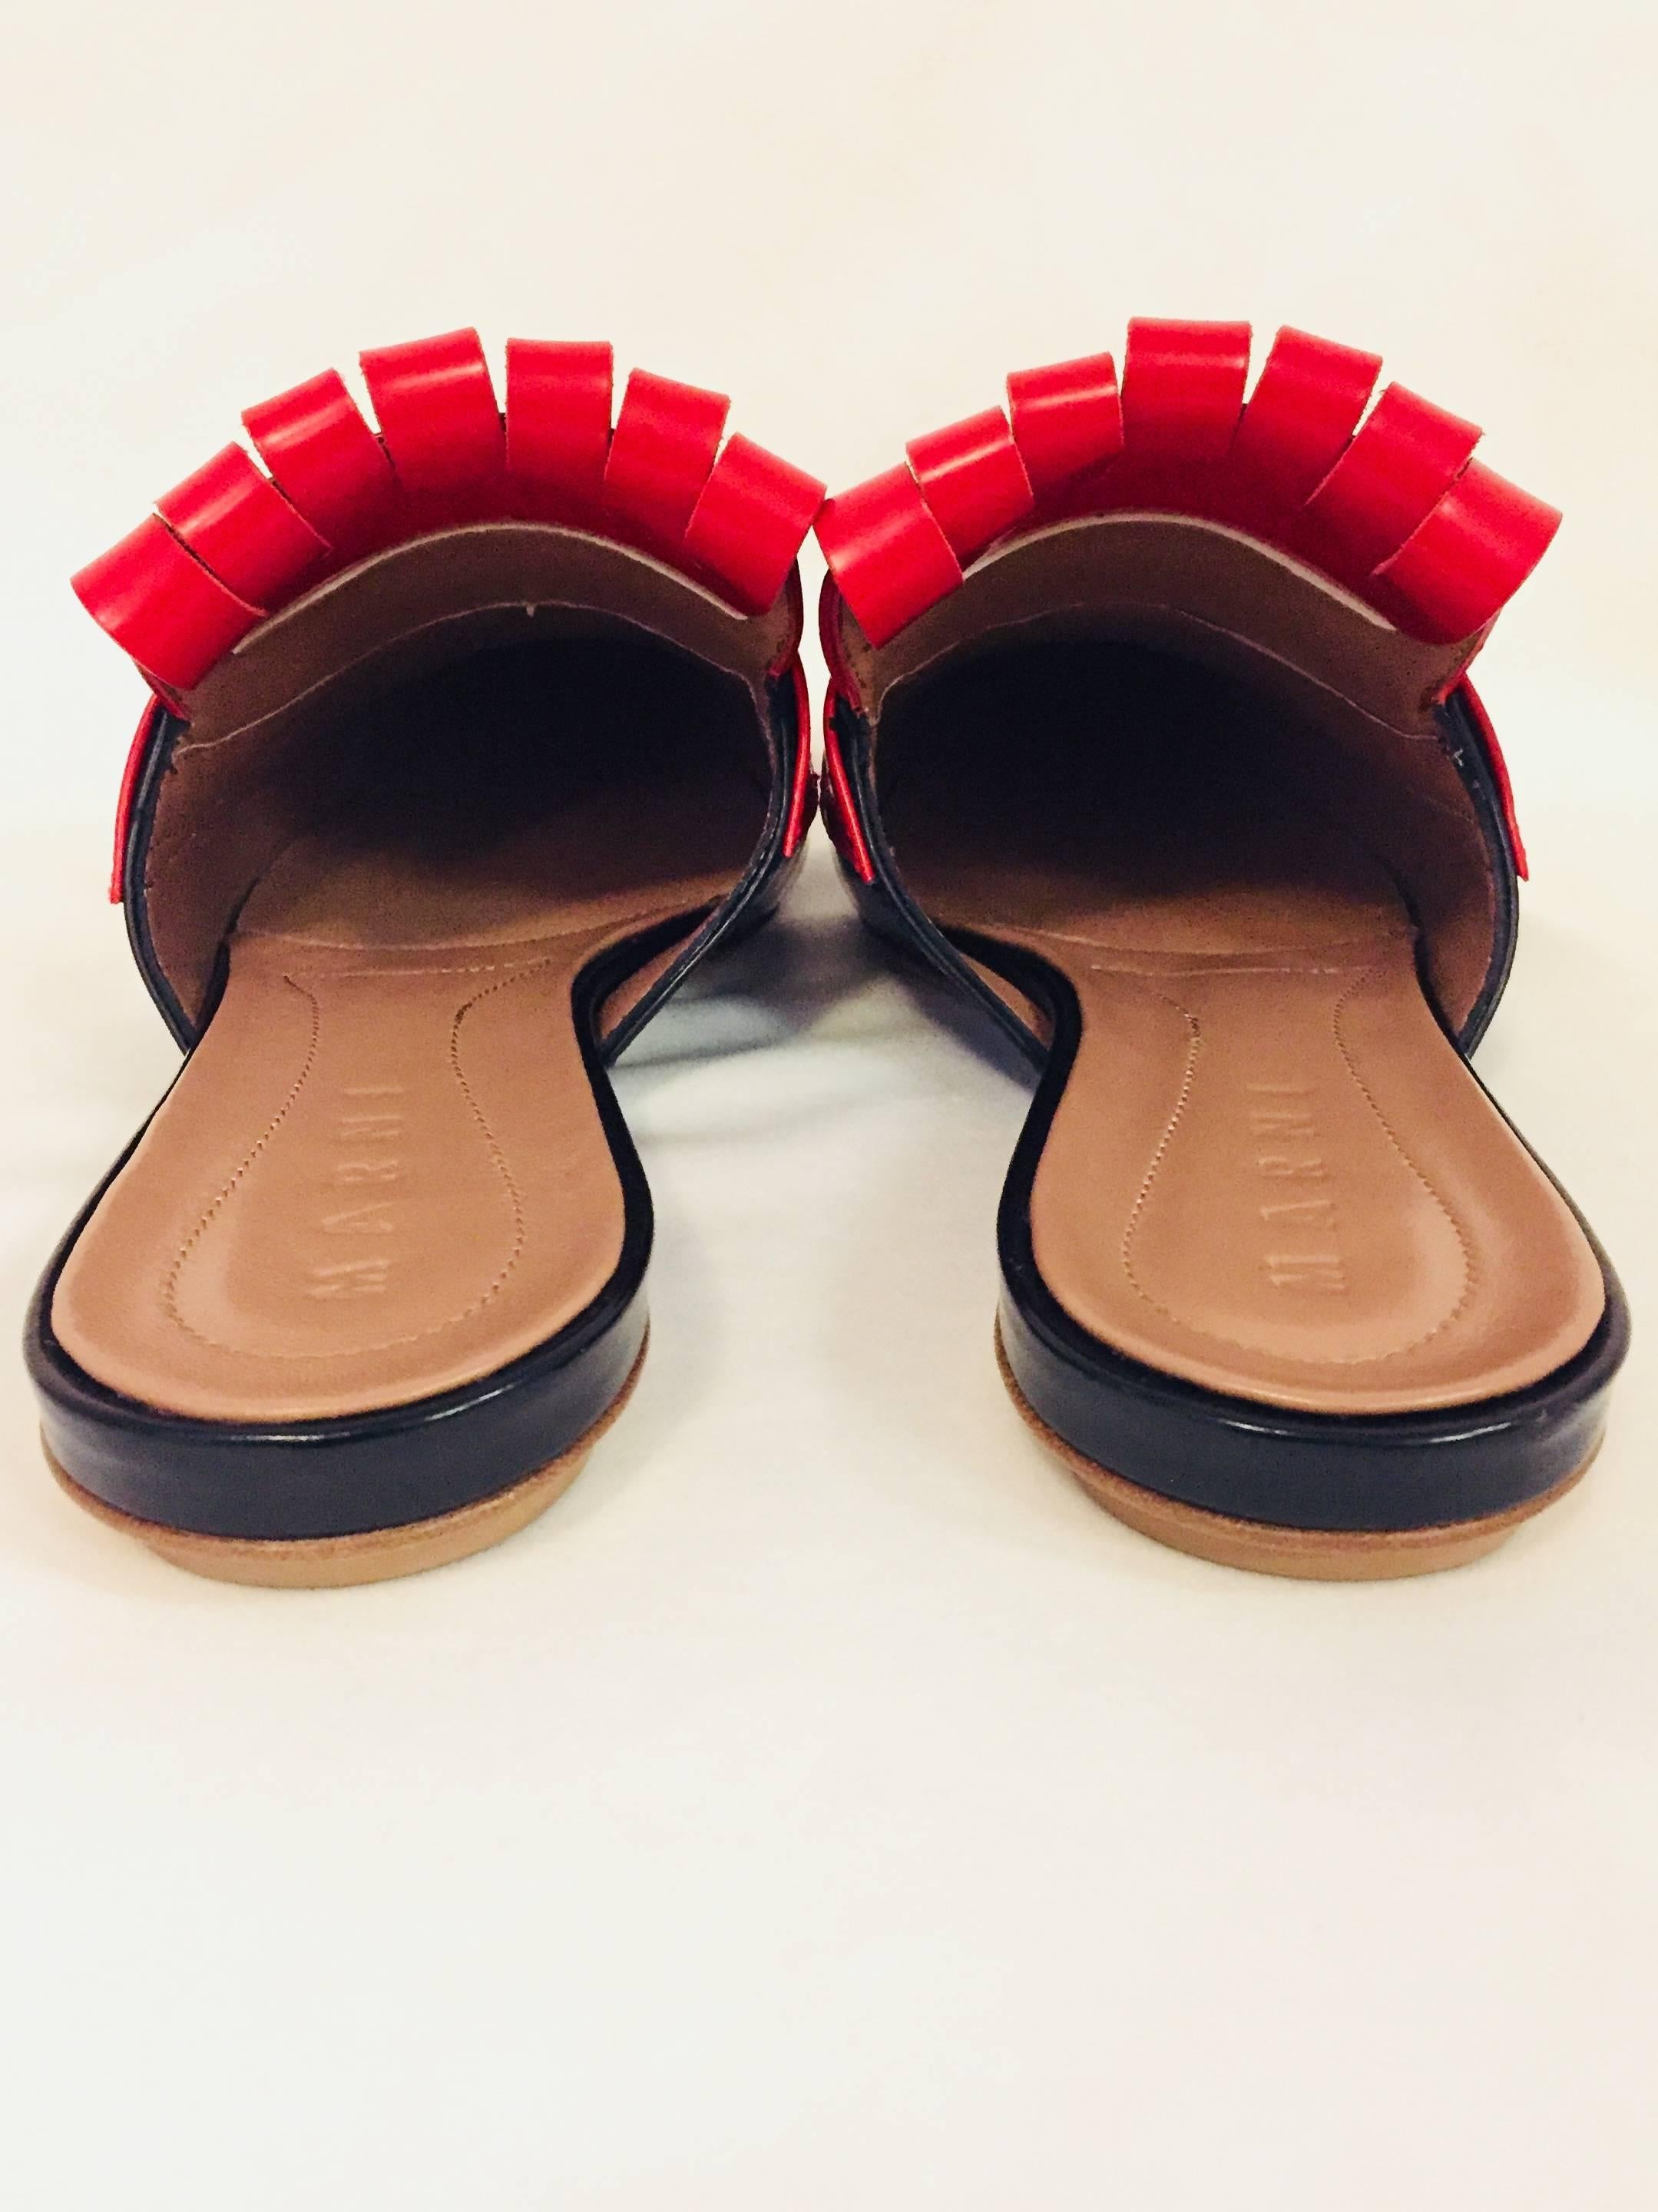 Marvelous Marni Black & Red Leather Flat Slippers 1